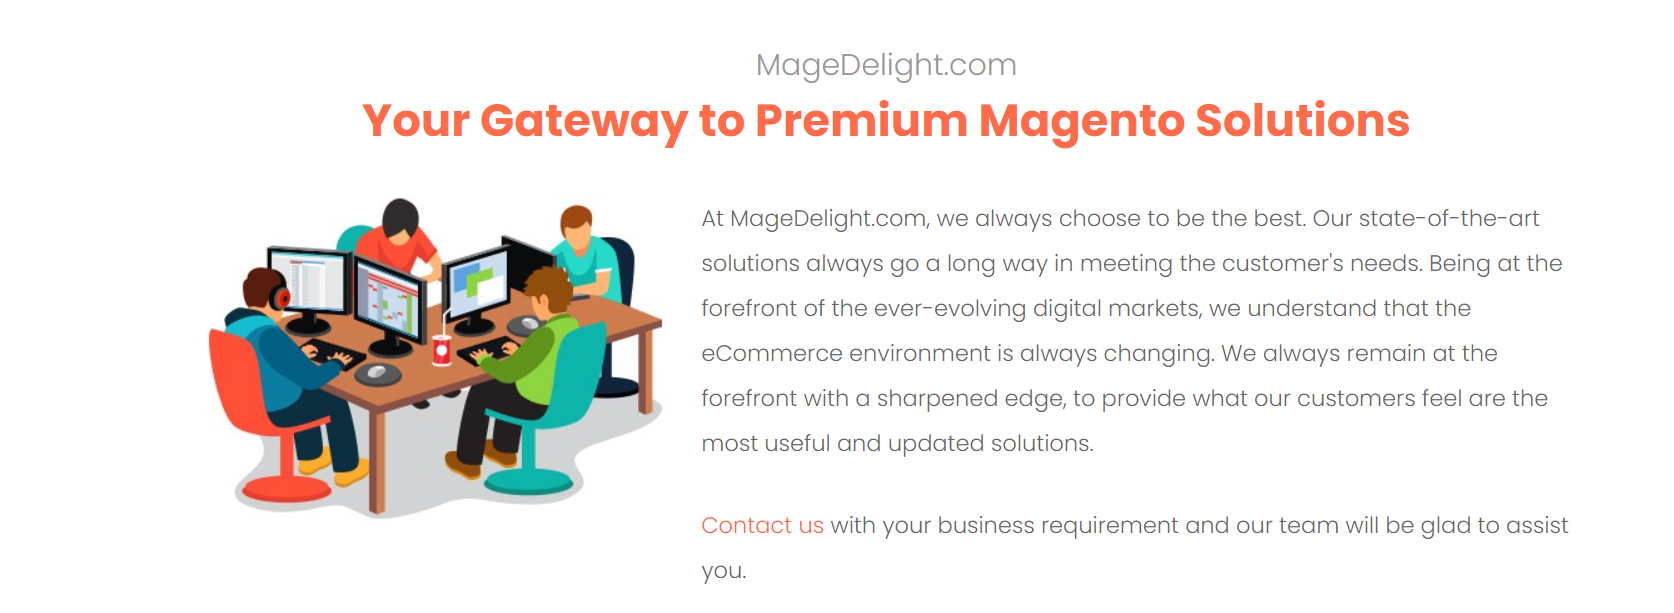 MageDelight Magento Agency